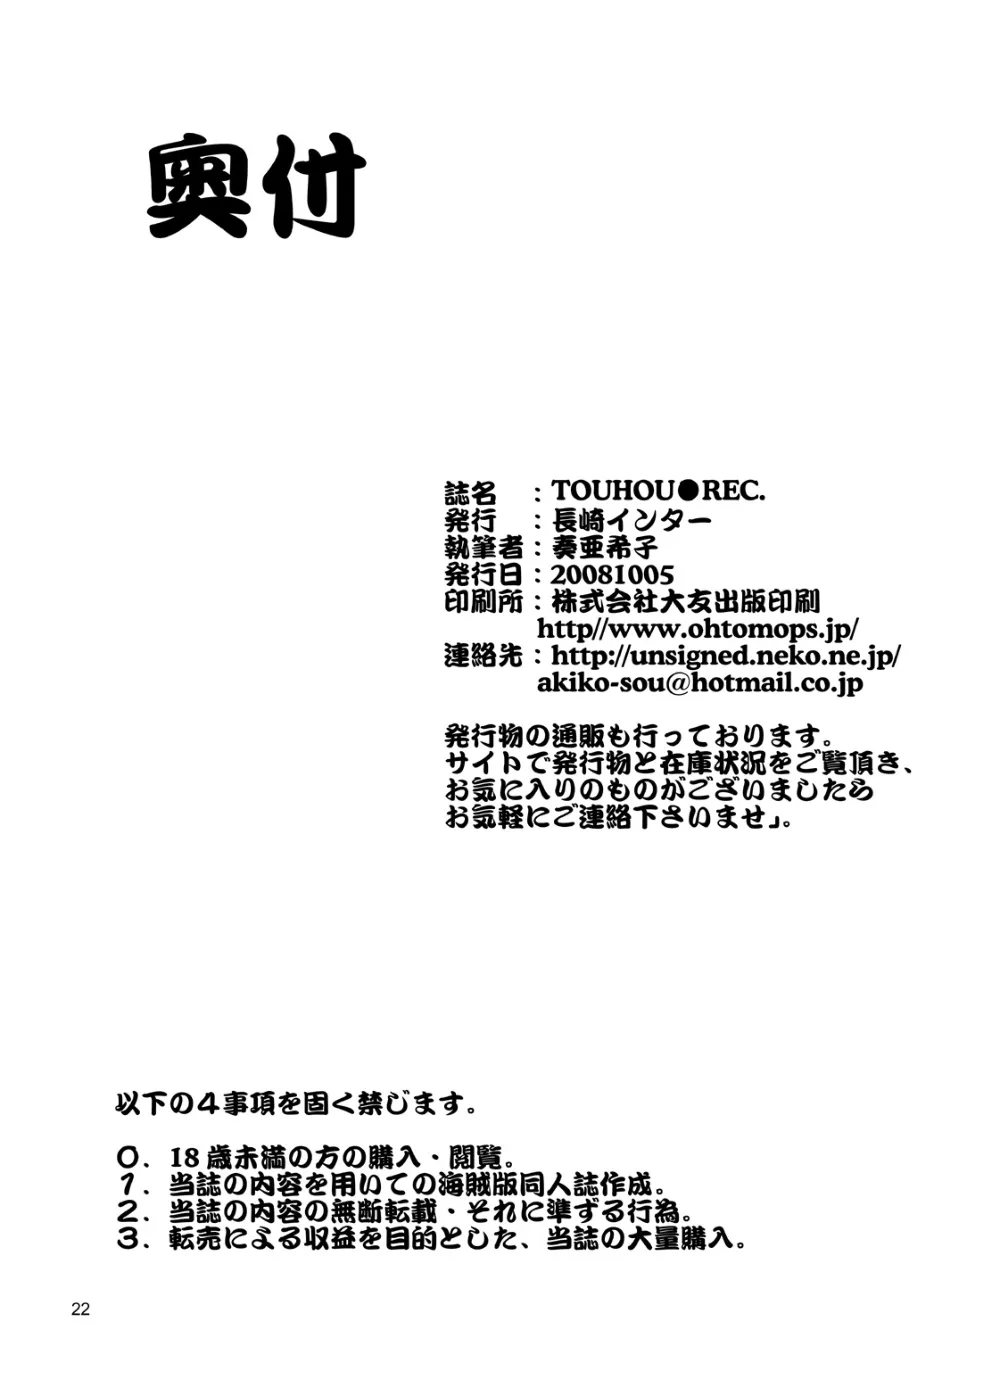 Touhou Project,TOUHOU REC [Japanese][第22页]